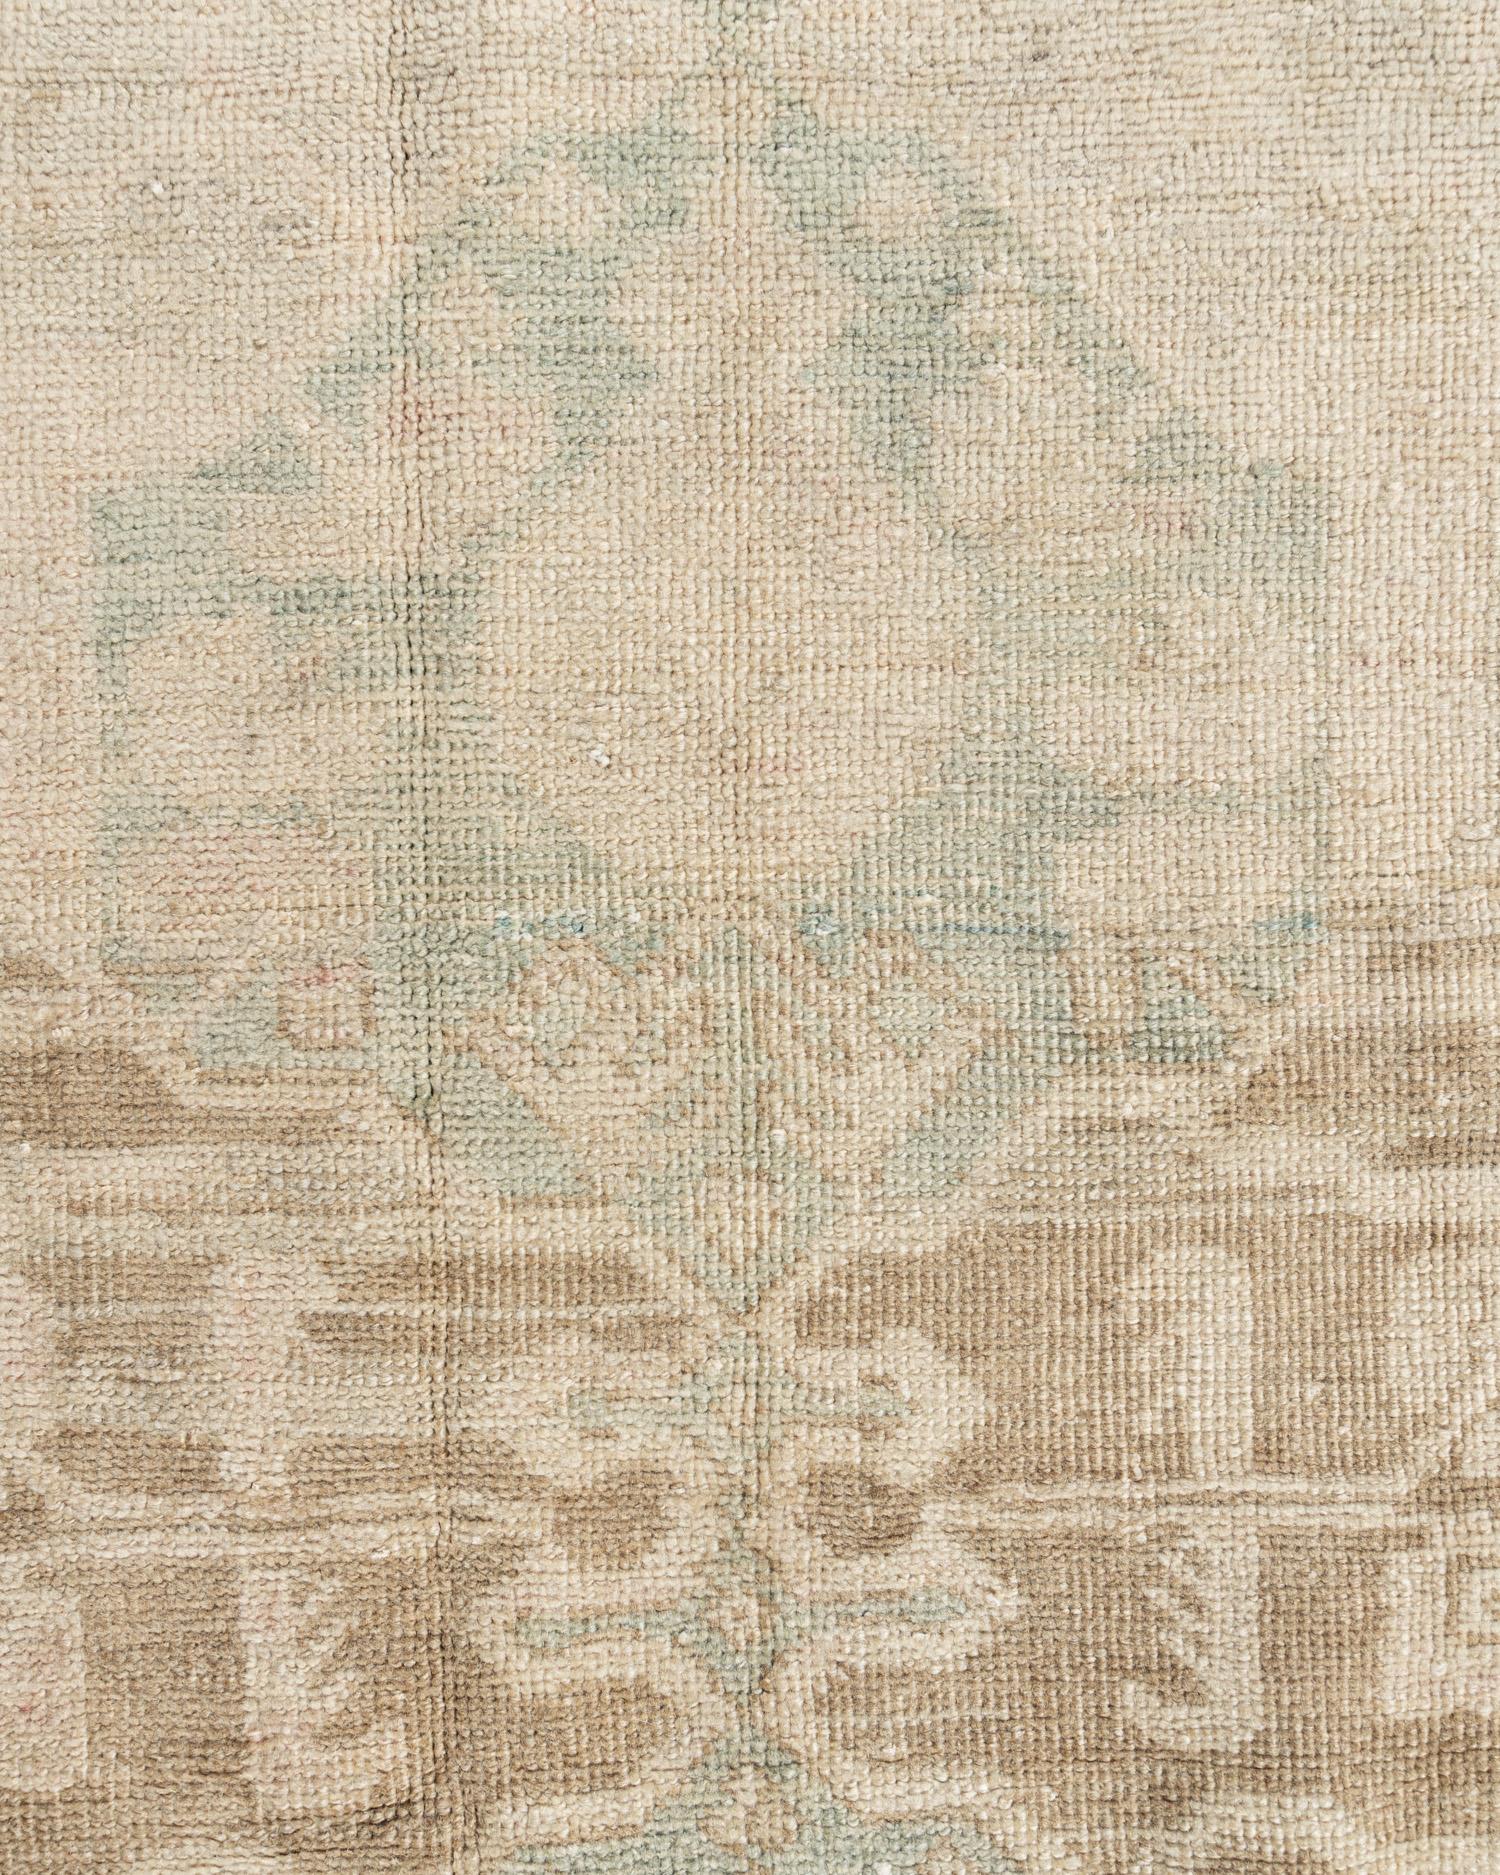 tage Beige Turkish Kula Area Rug 5'8 X 9'9 In Good Condition For Sale In New York, NY